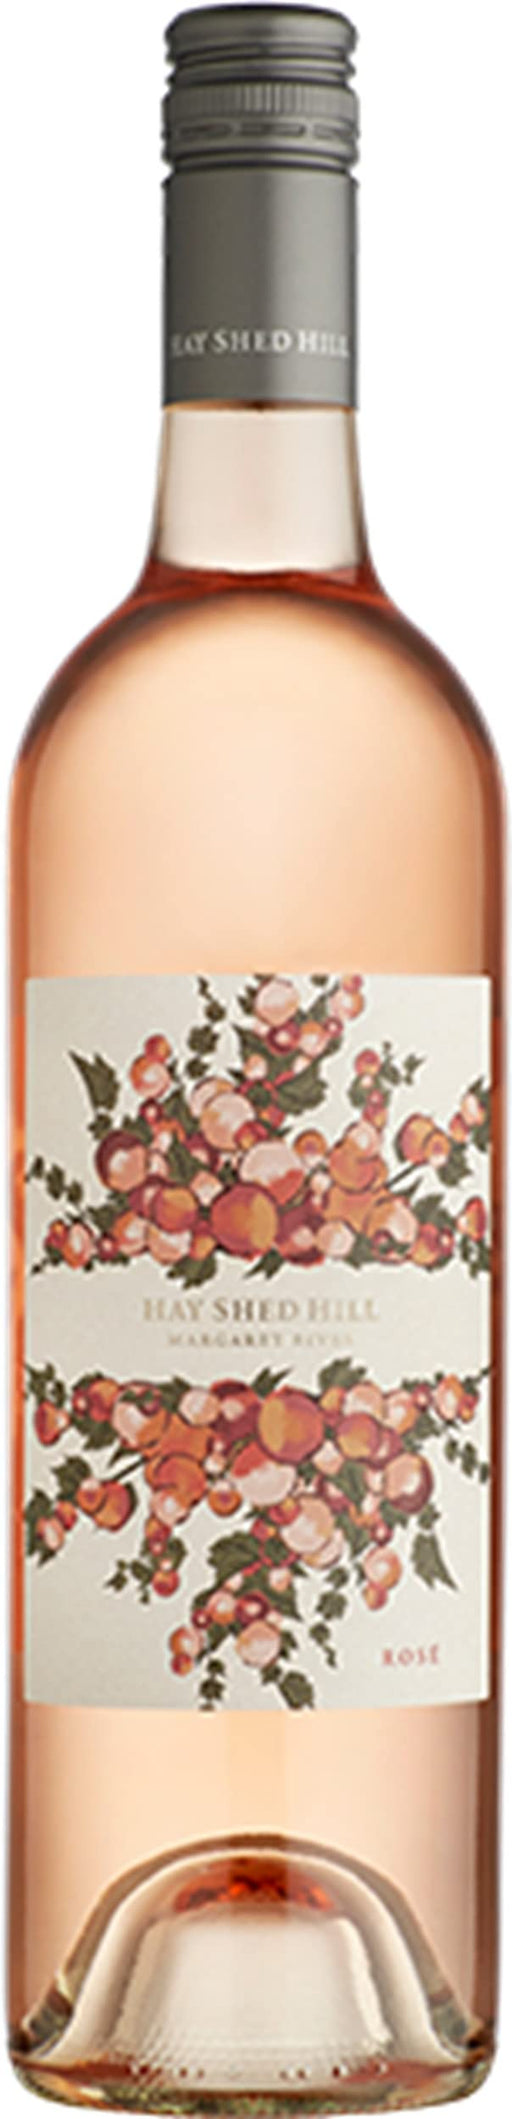 Hay Shed Hill Vineyard Series Pinot Noir Rose 2022 750 ml, Pack of 12  Hay Shed Hill